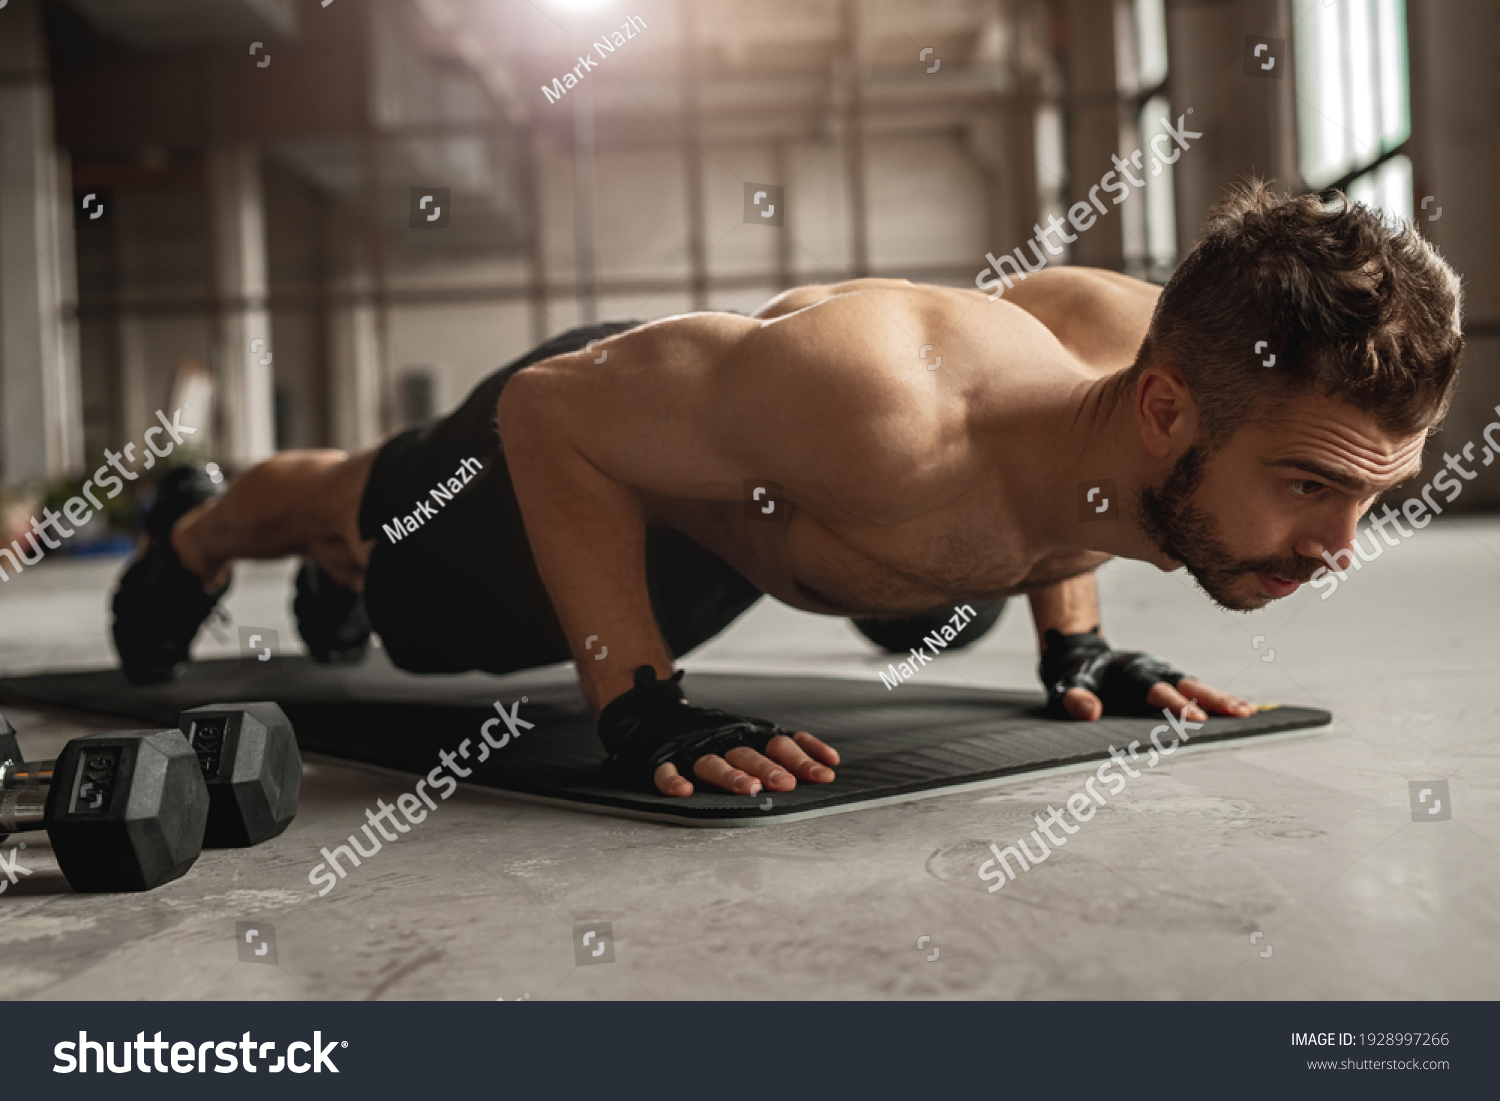 Muscular man doing push up exercise on mat near dumbbells during intense fitness workout in grungy gym #1928997266